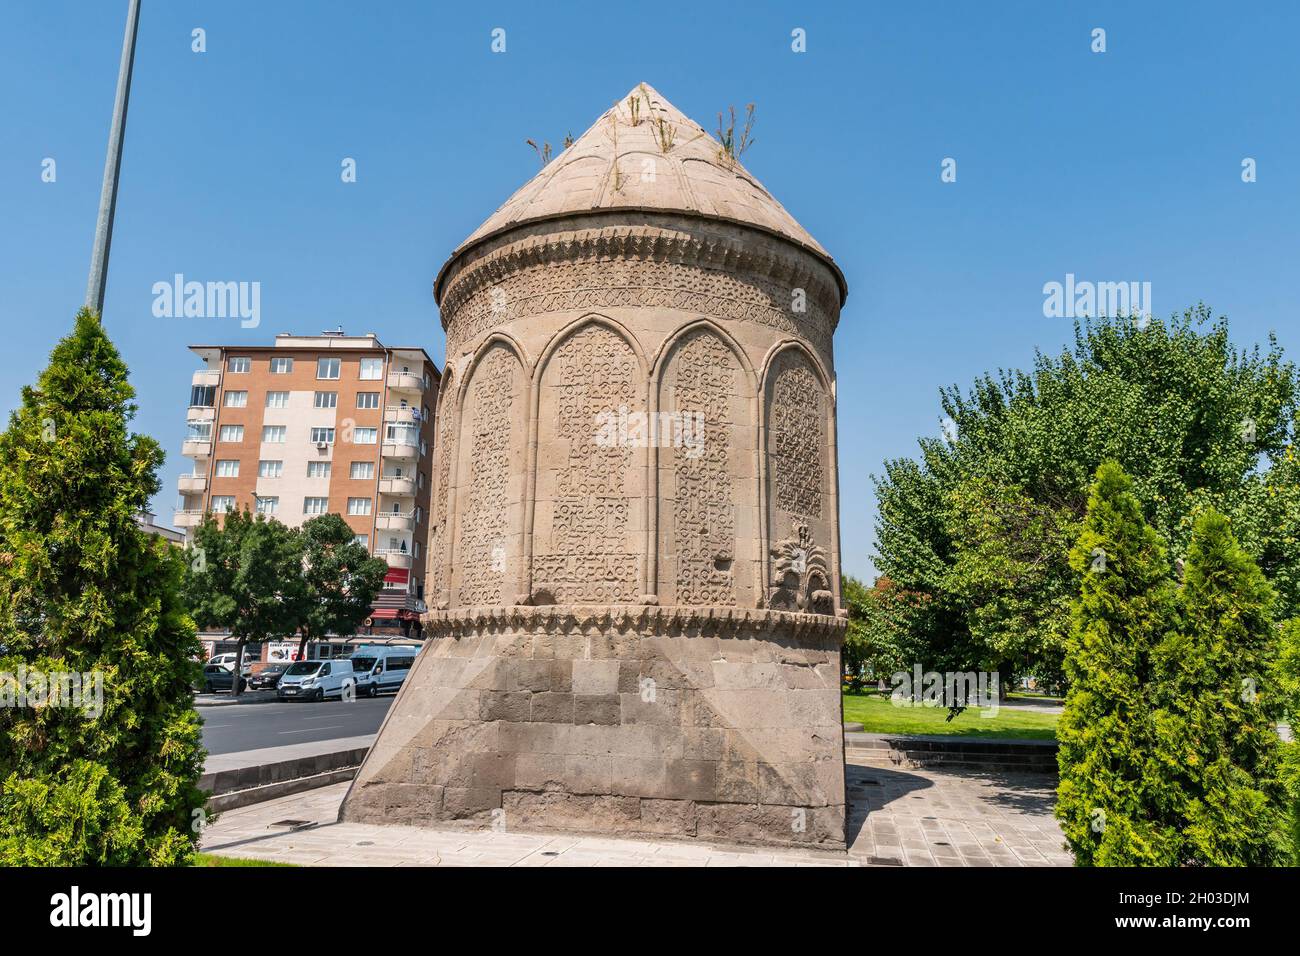 Kayseri Doner Dome Kumbet Breathtaking Picturesque View on a Blue Sky Day in Summer Stock Photo